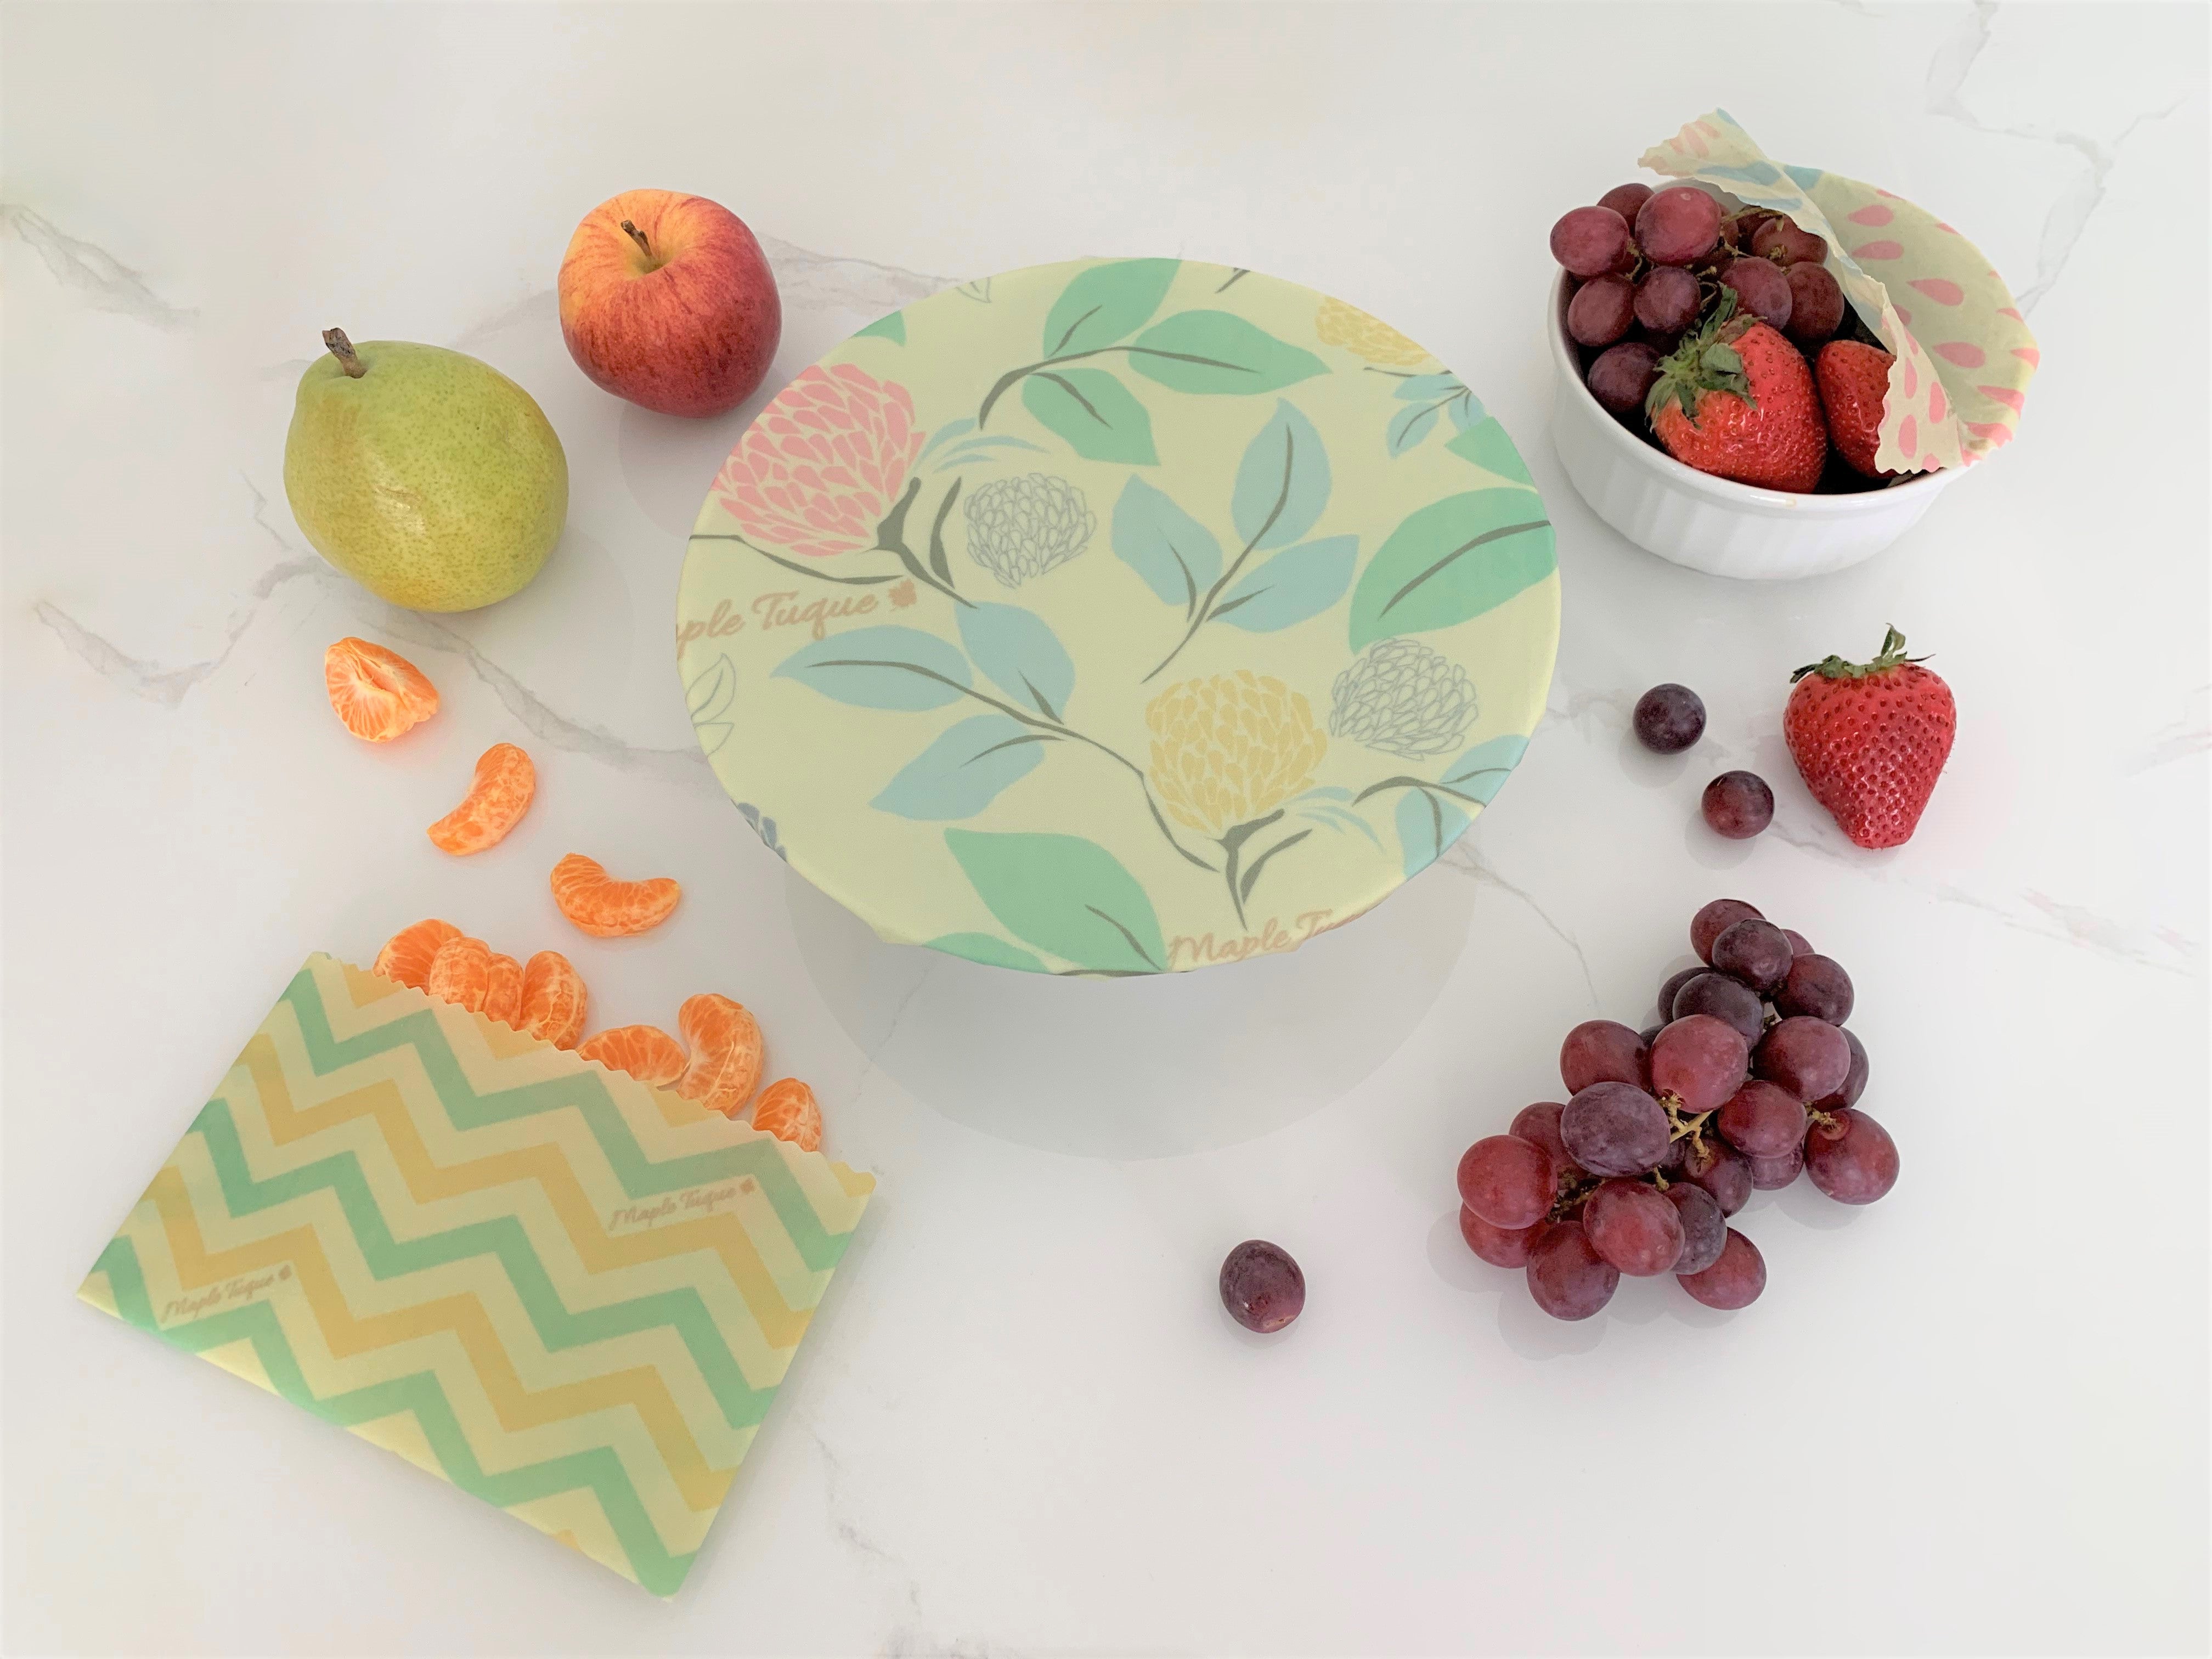 Beeswax Wraps, made in Canada. Wrapping fruits.